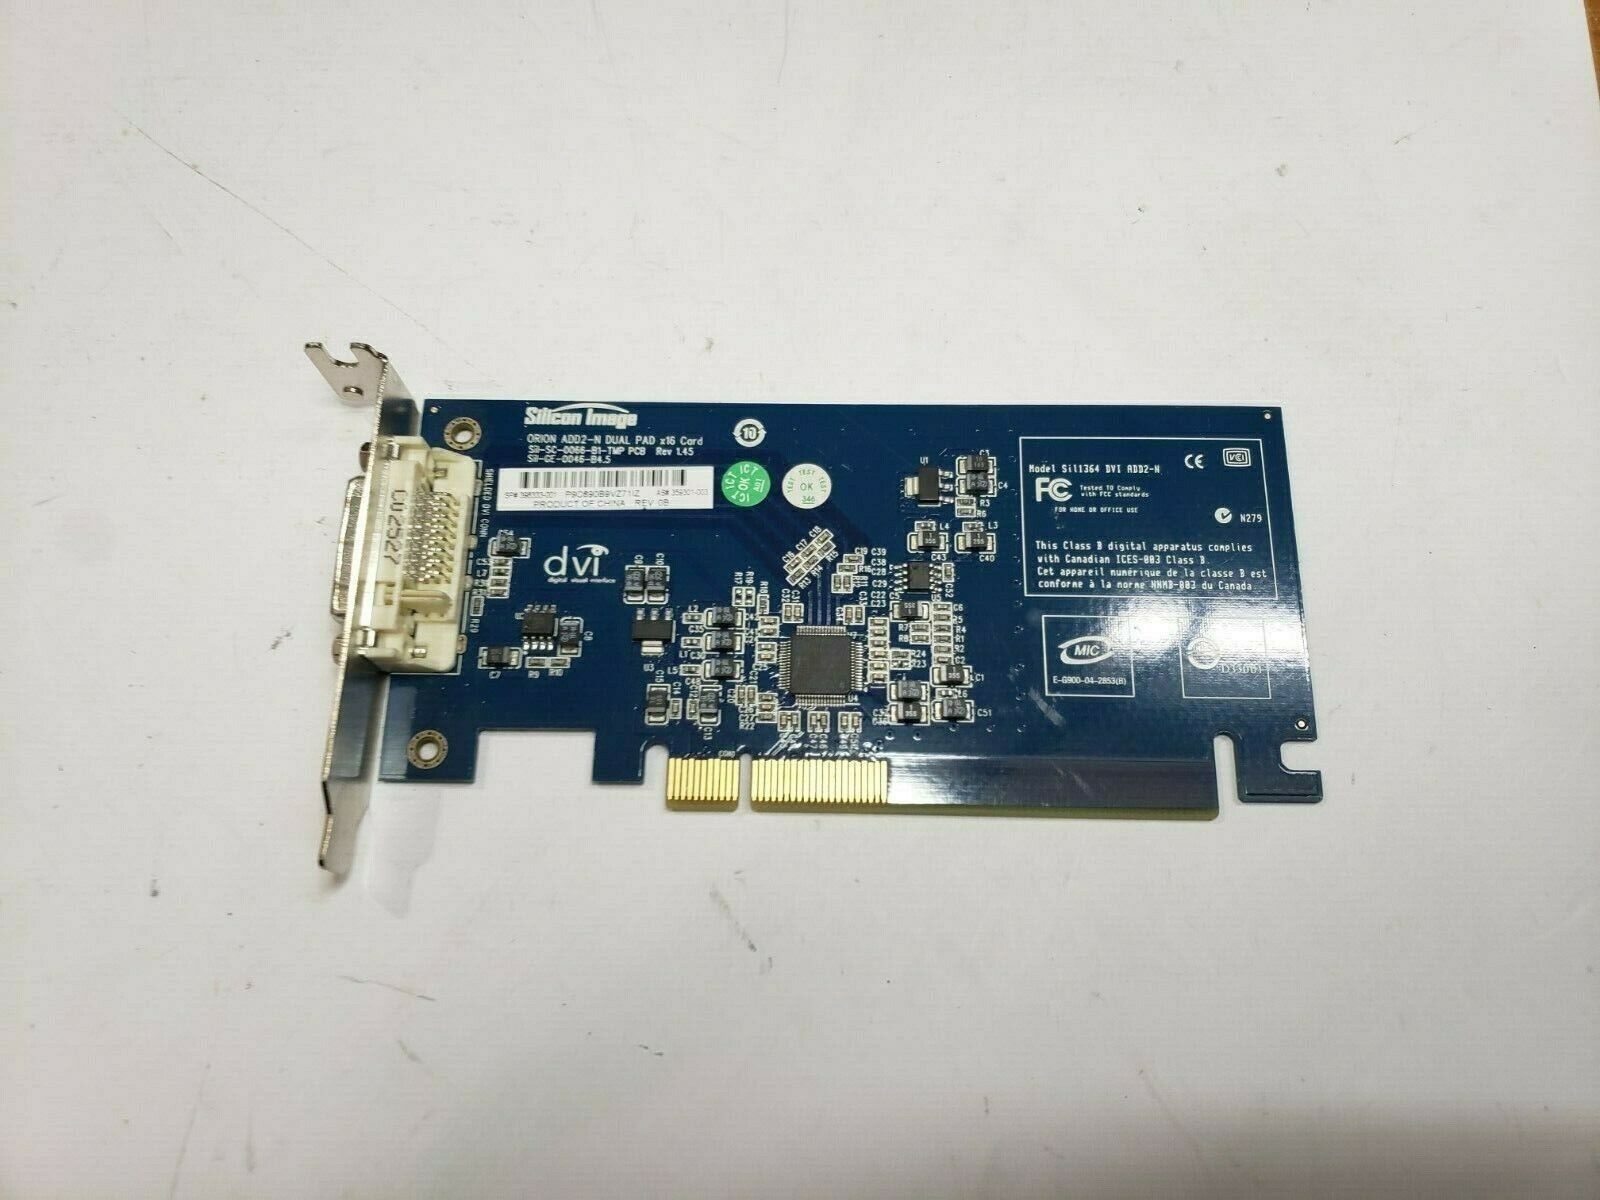 Silicon Image Sil1364 DVI ADD2-N Card 359301-003 398333-001 TESTED FAST SHIP |